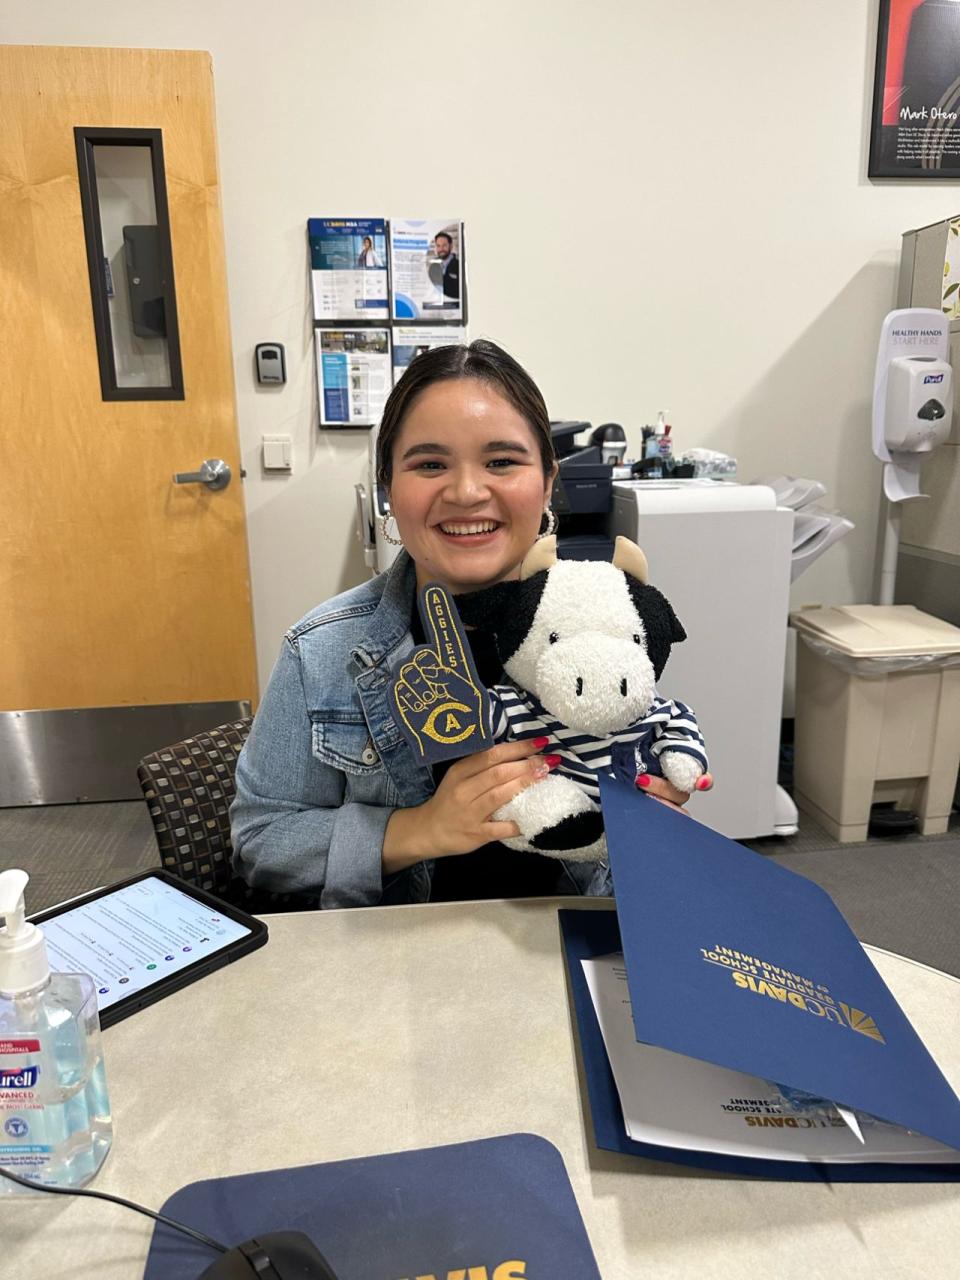 Marisol Ibarra holding up a stuffed cow as part of her UC Davis swag